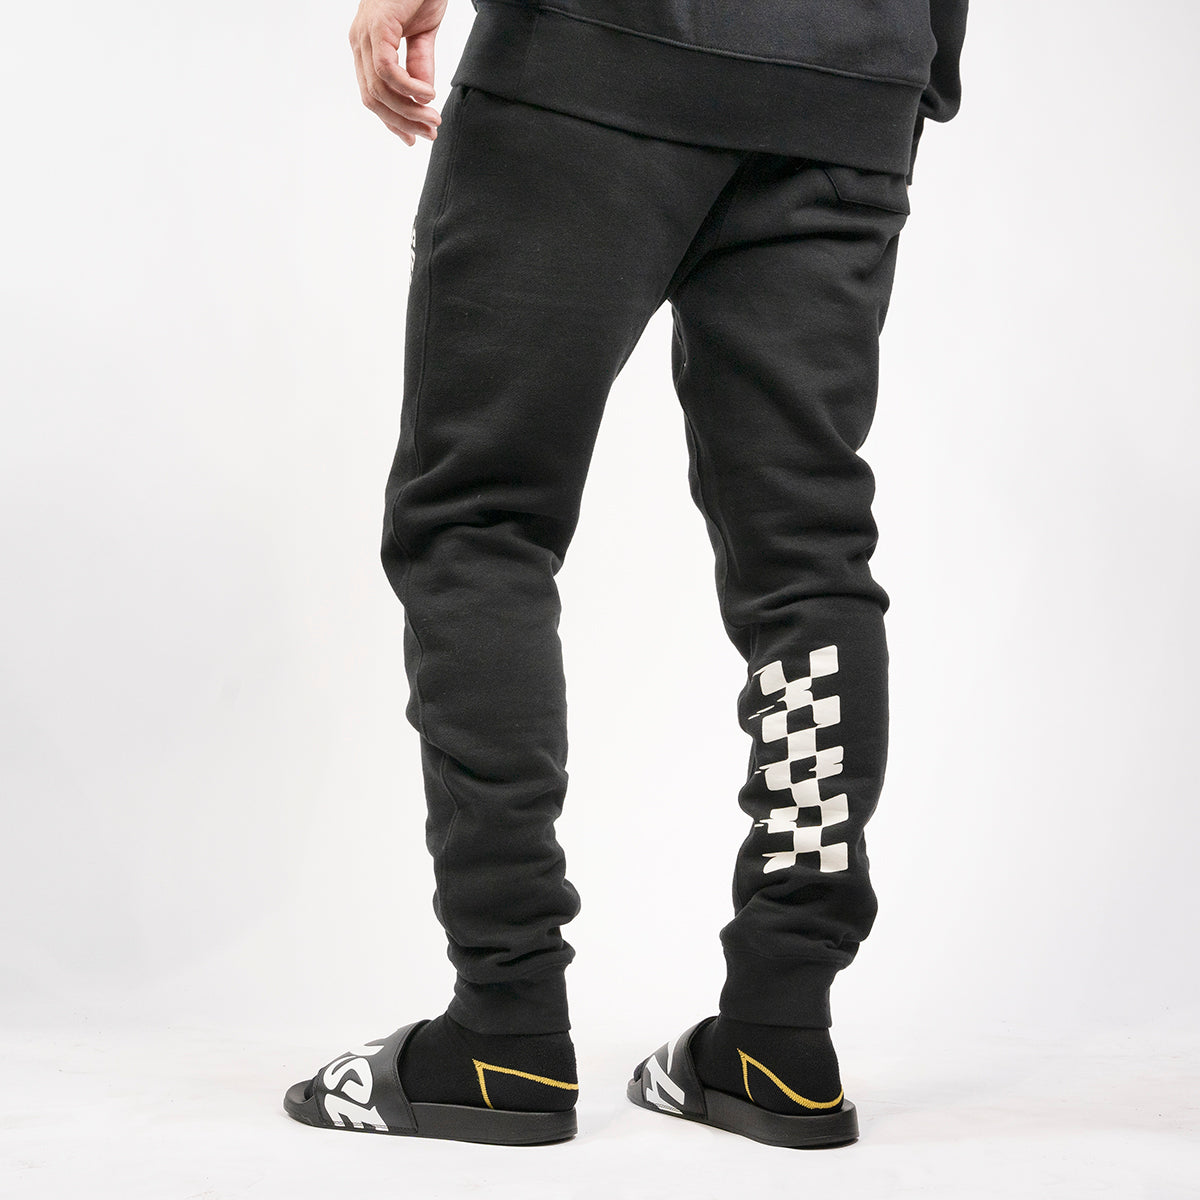 Oversized Joggers in black, grey and cream with zips - Branded